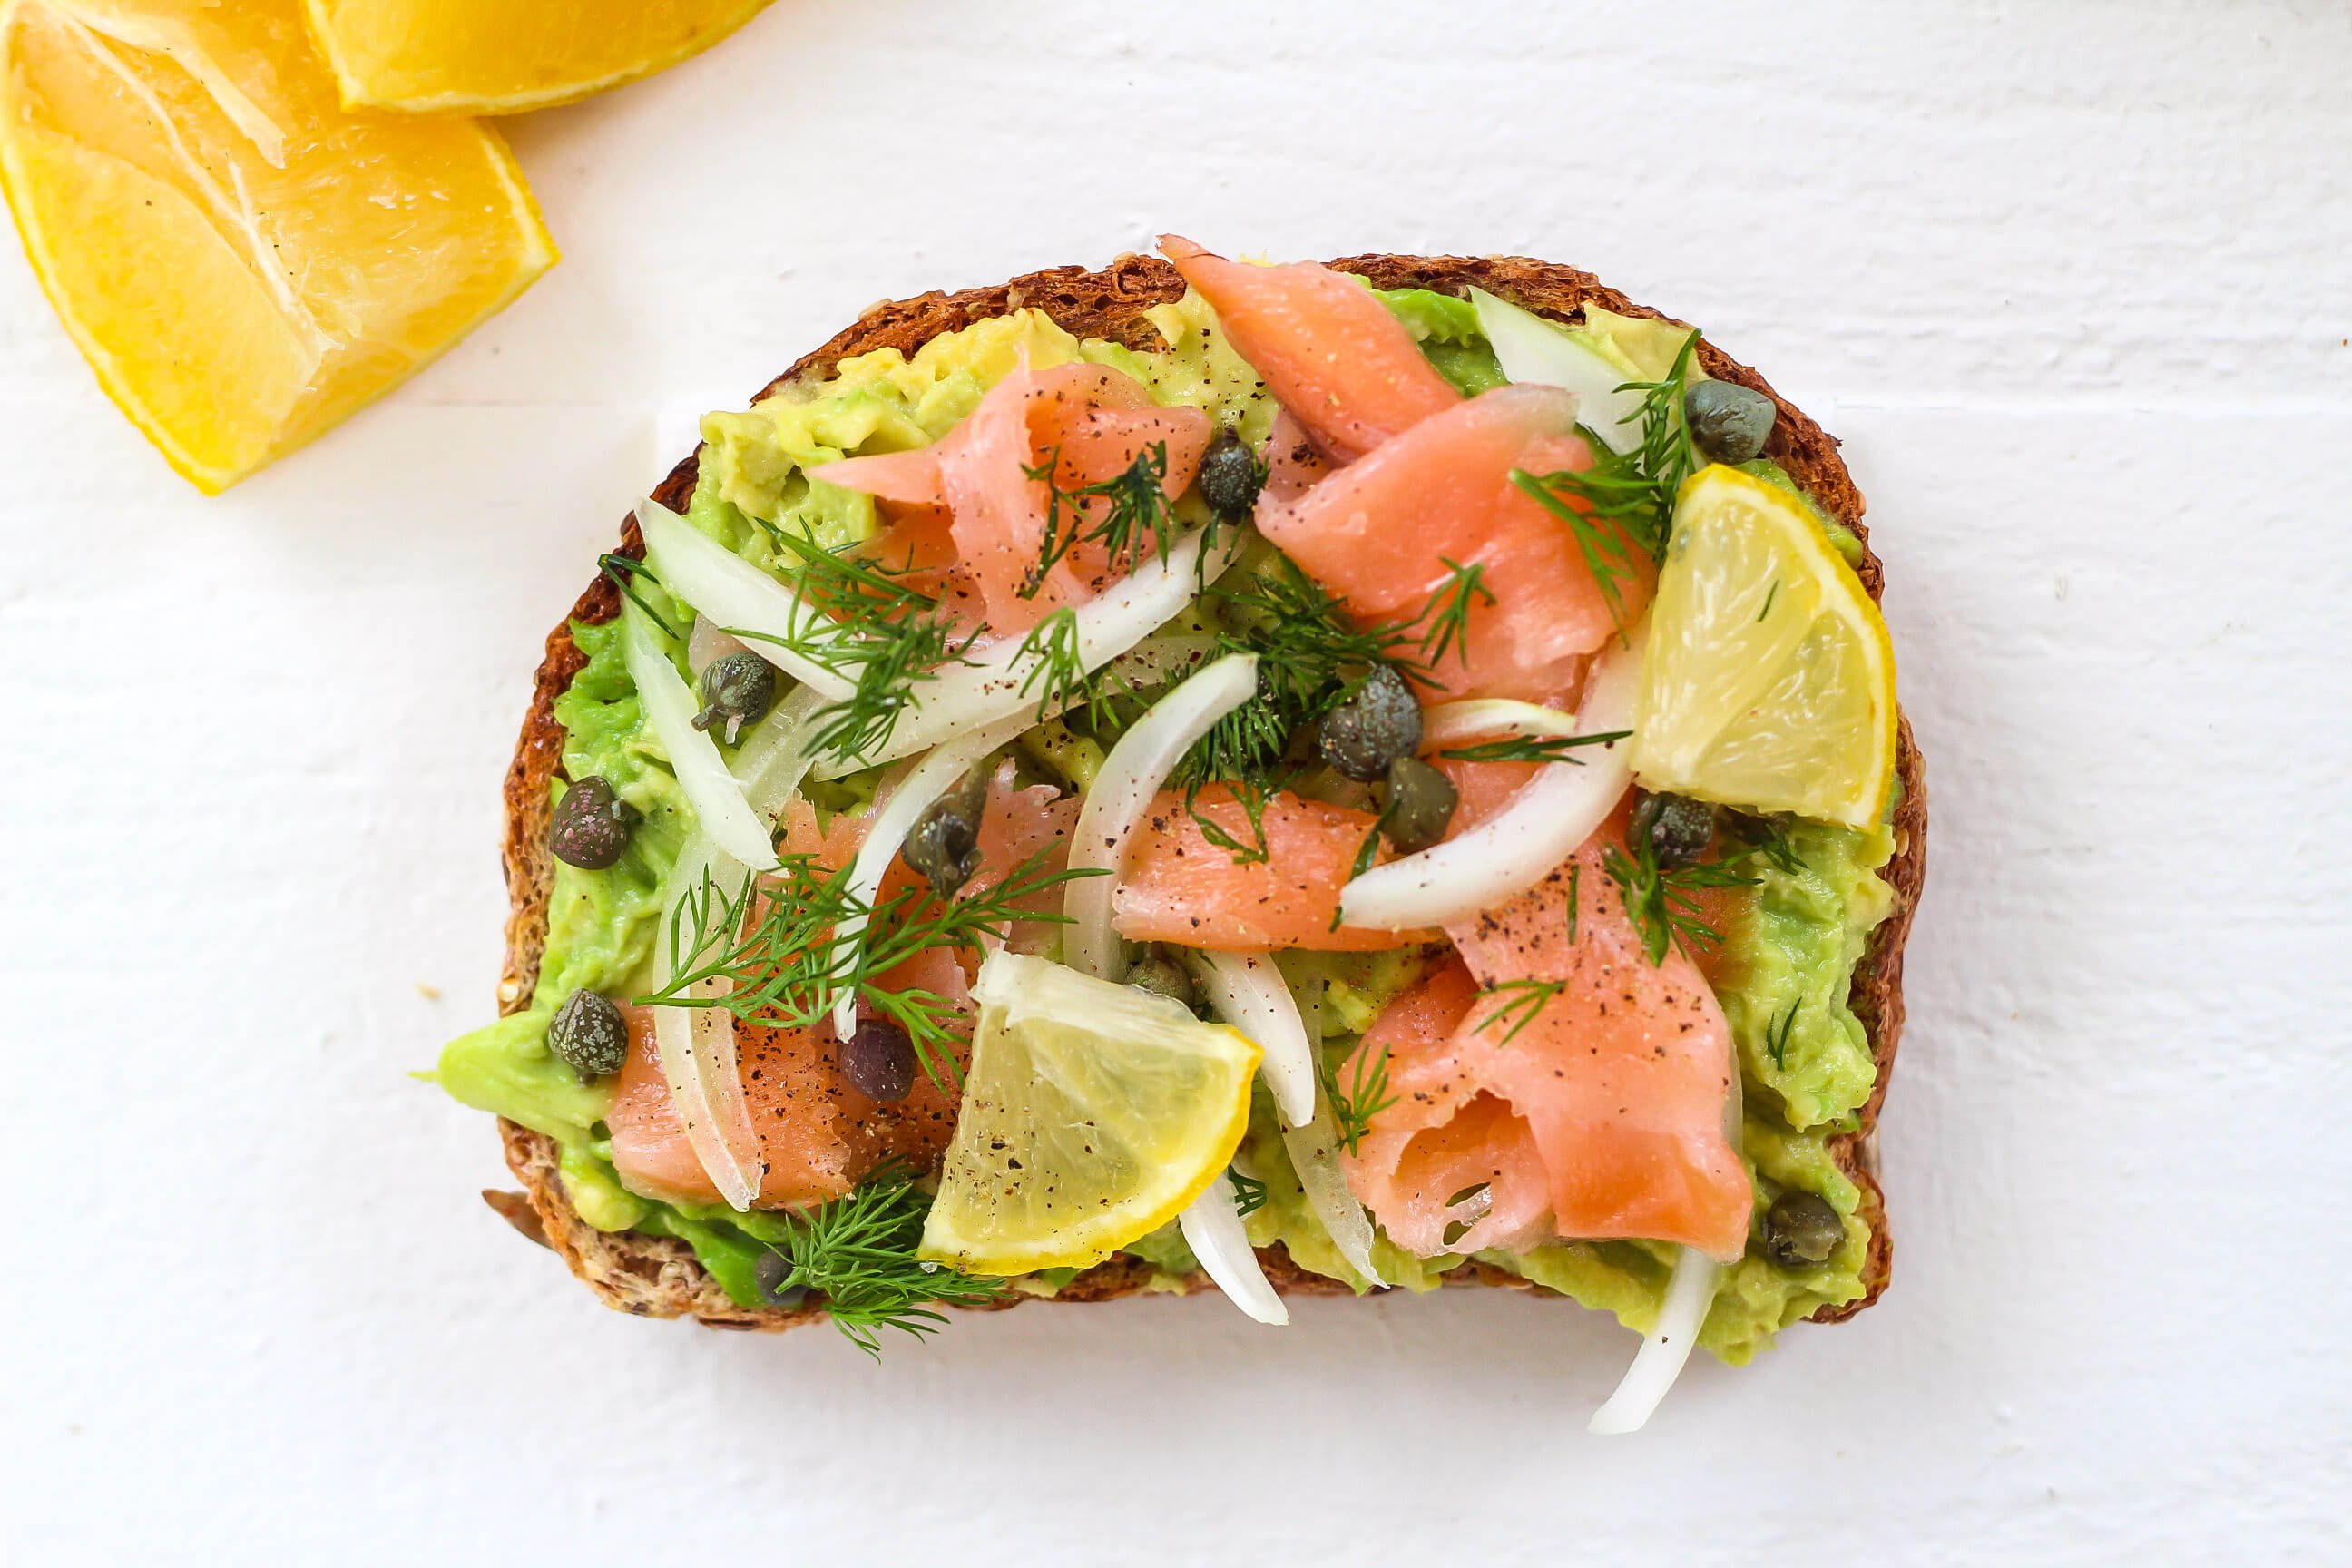 How a Gut Health Expert Meal Plans for Clients: Smoked Salmon Avocado Toast